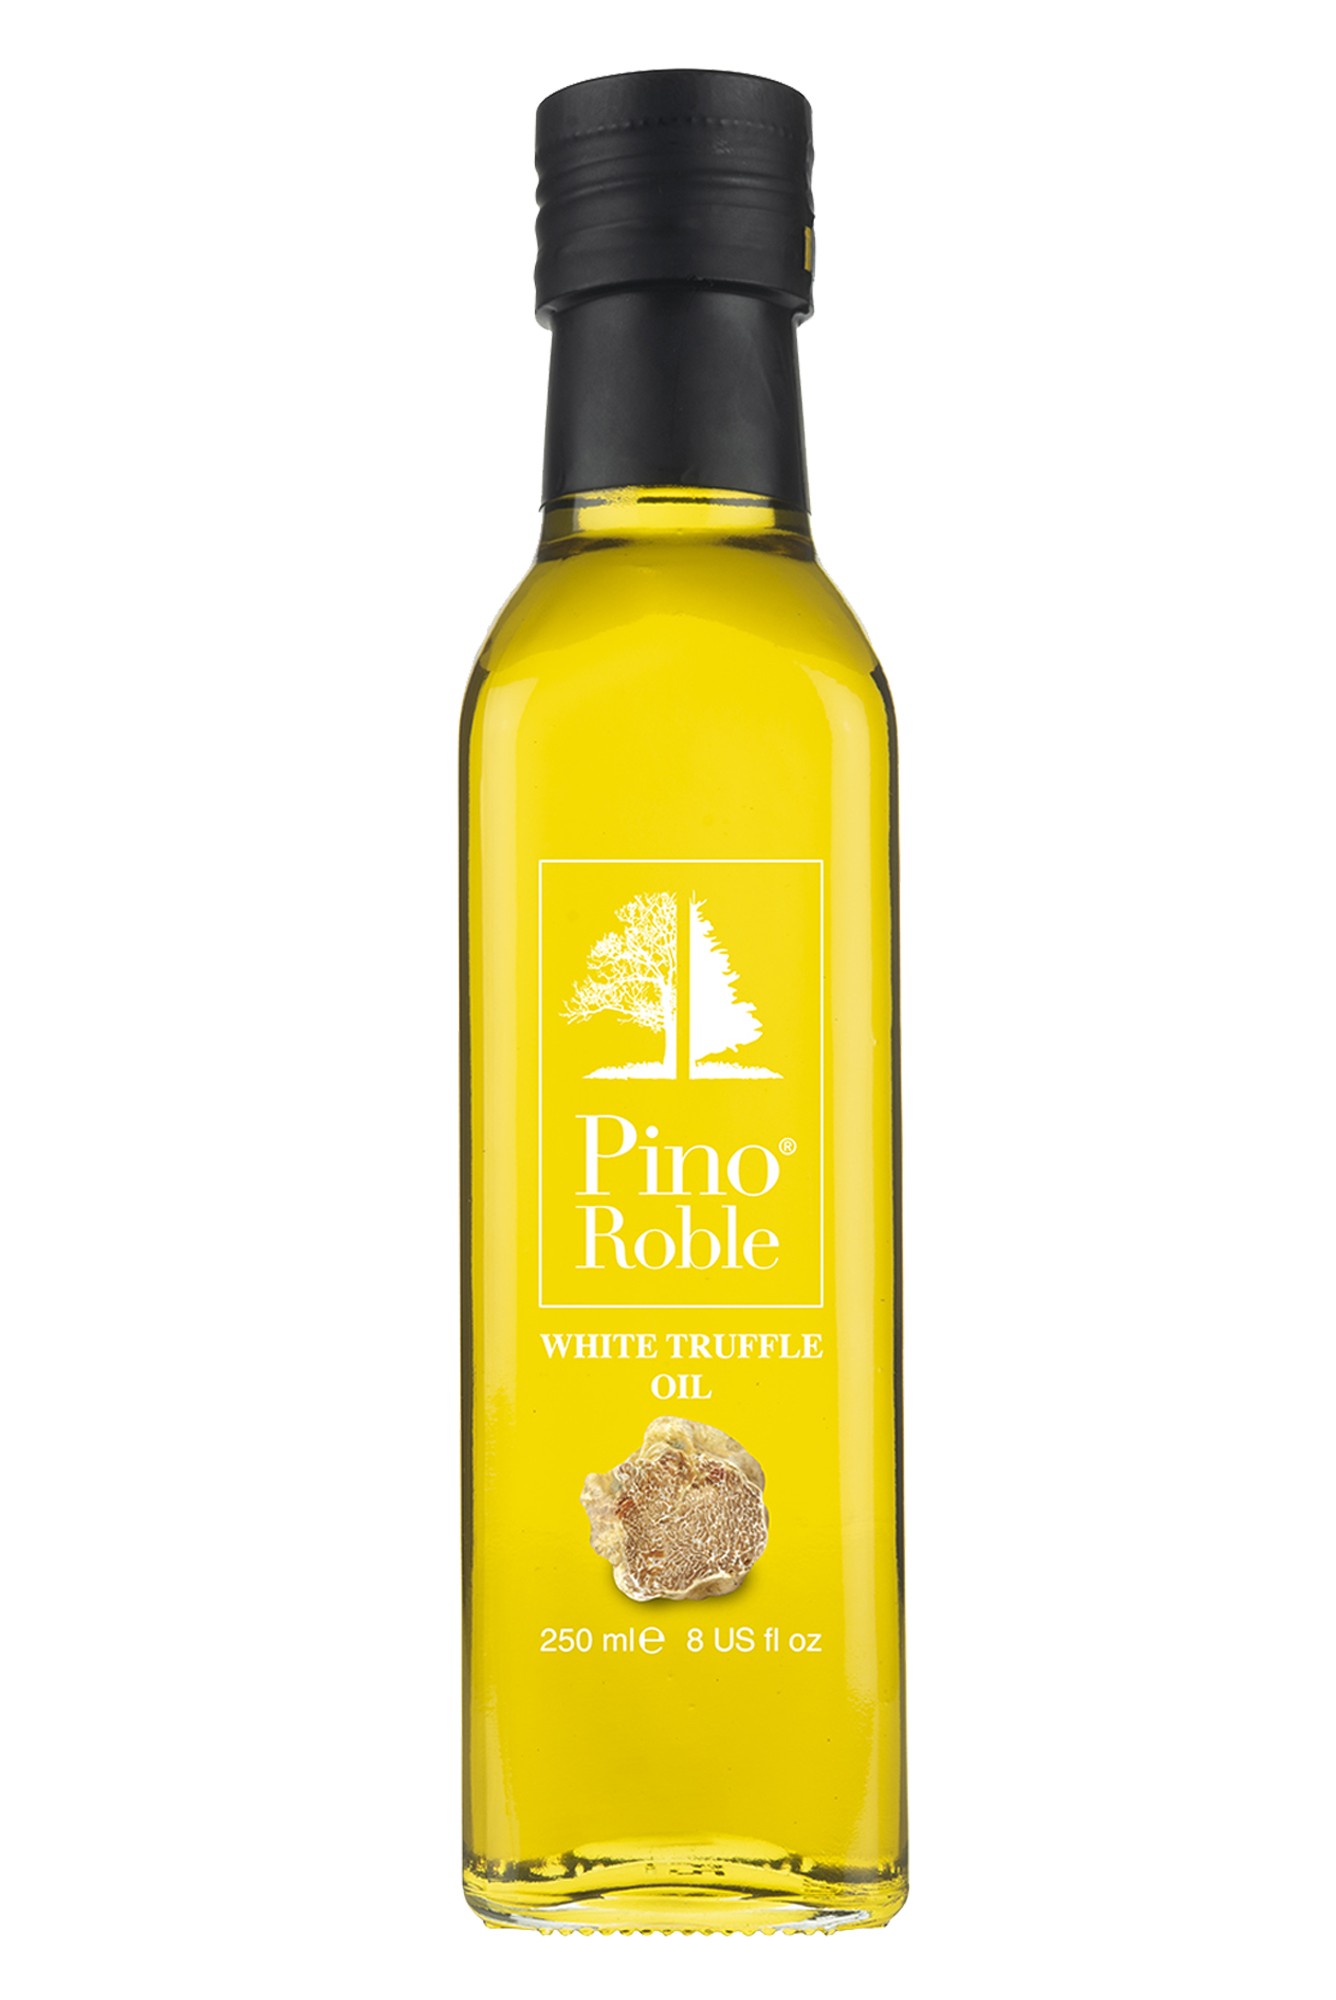 PinoRoble Extra Virgin Olive Oil with Natural White Truffle Flavour 8 fl Oz